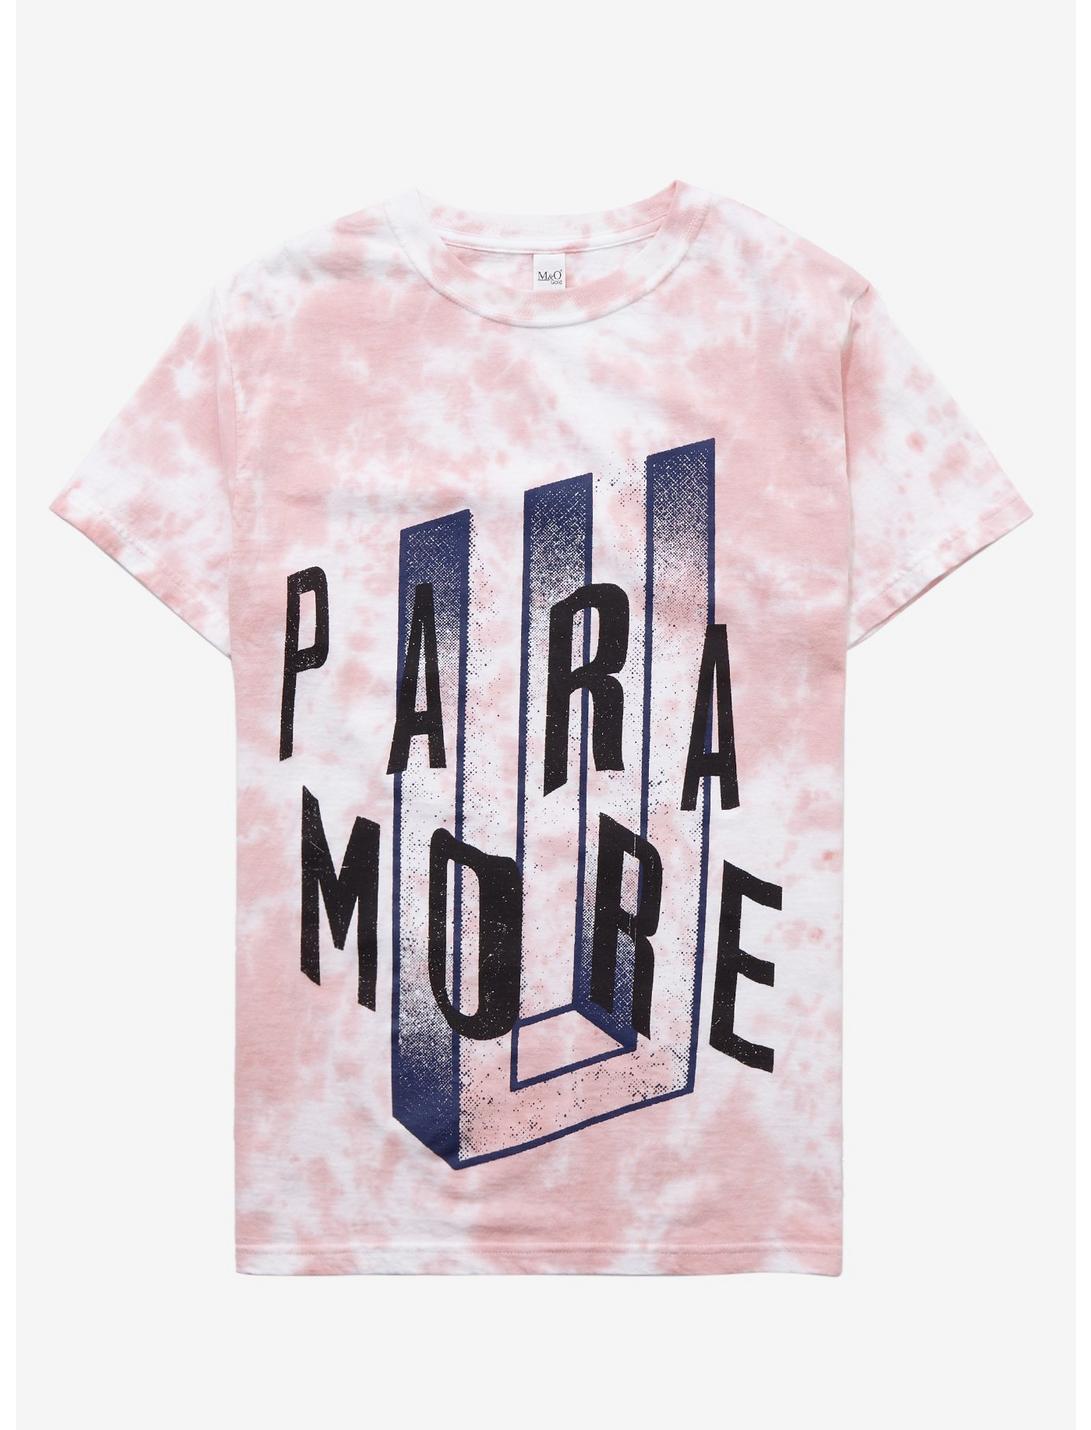 Paramore After Laughter Tie-Dye Girls T-Shirt, MULTI, hi-res